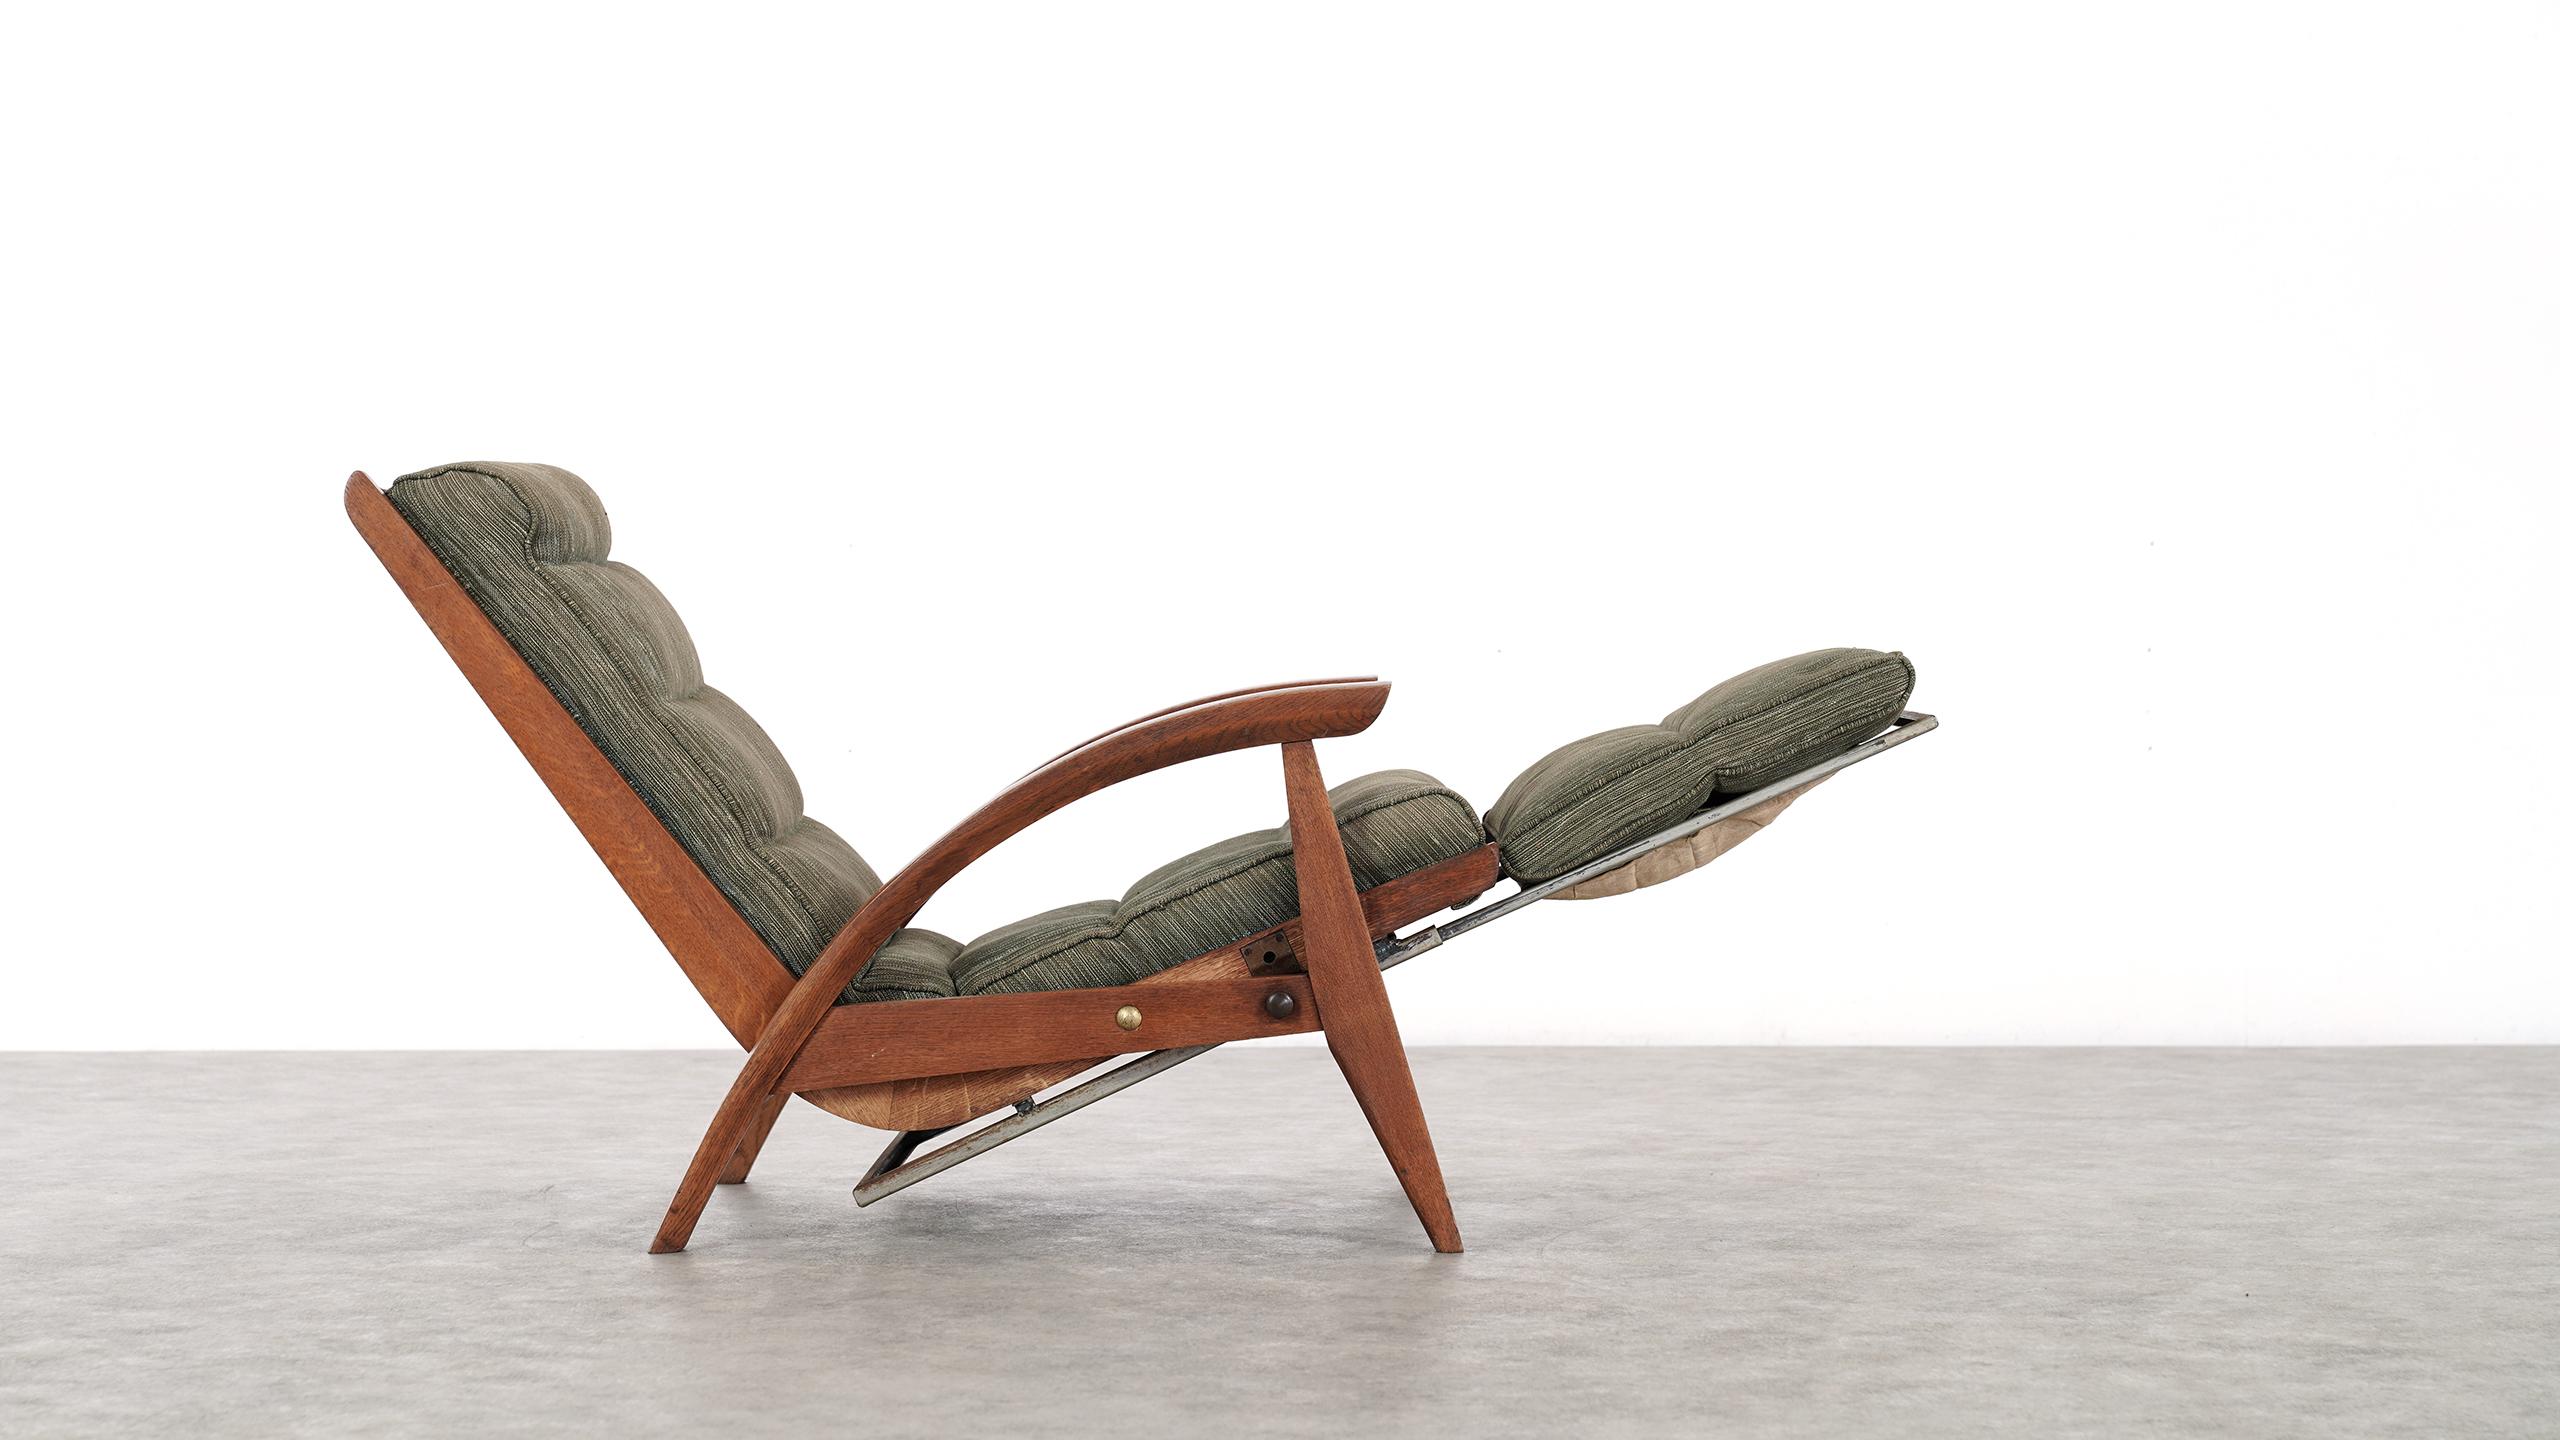 Guy Besnard FS 134 Reclining Lounge Chair, 1954 for Free Span, France Prouvé 1